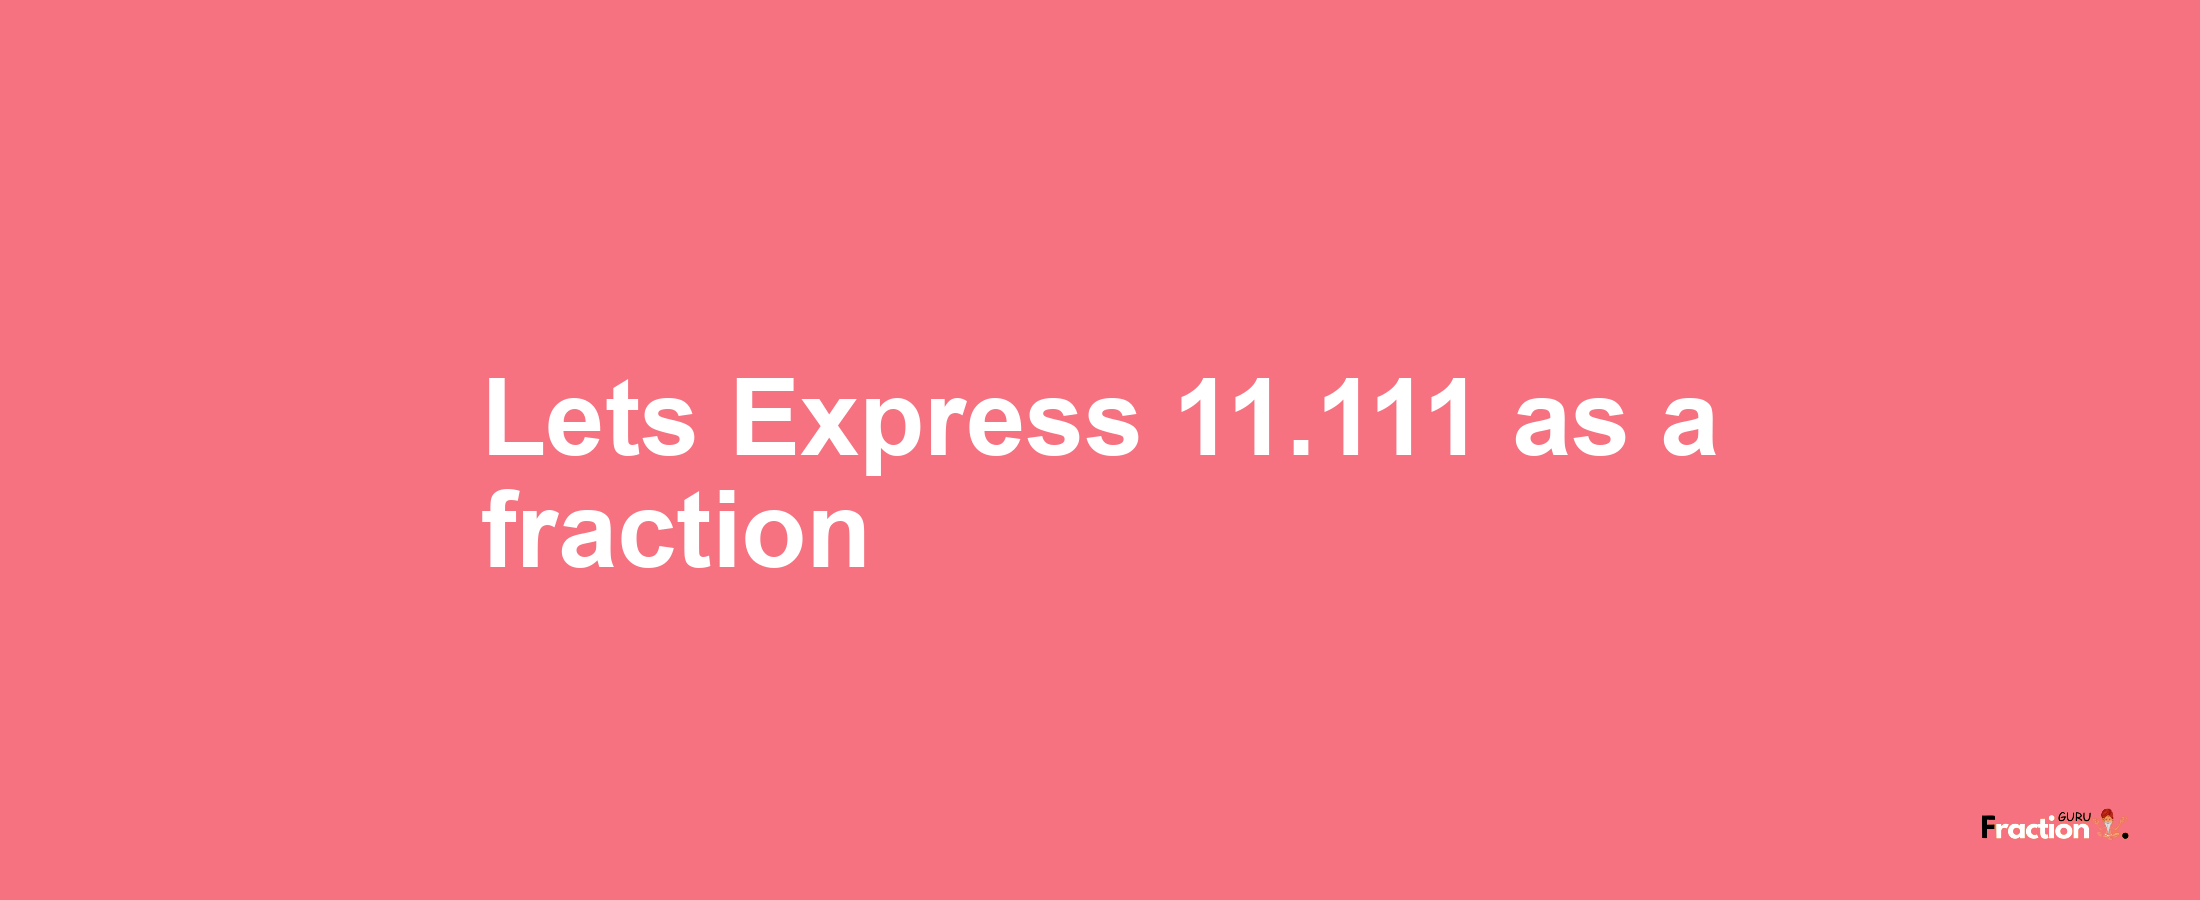 Lets Express 11.111 as afraction